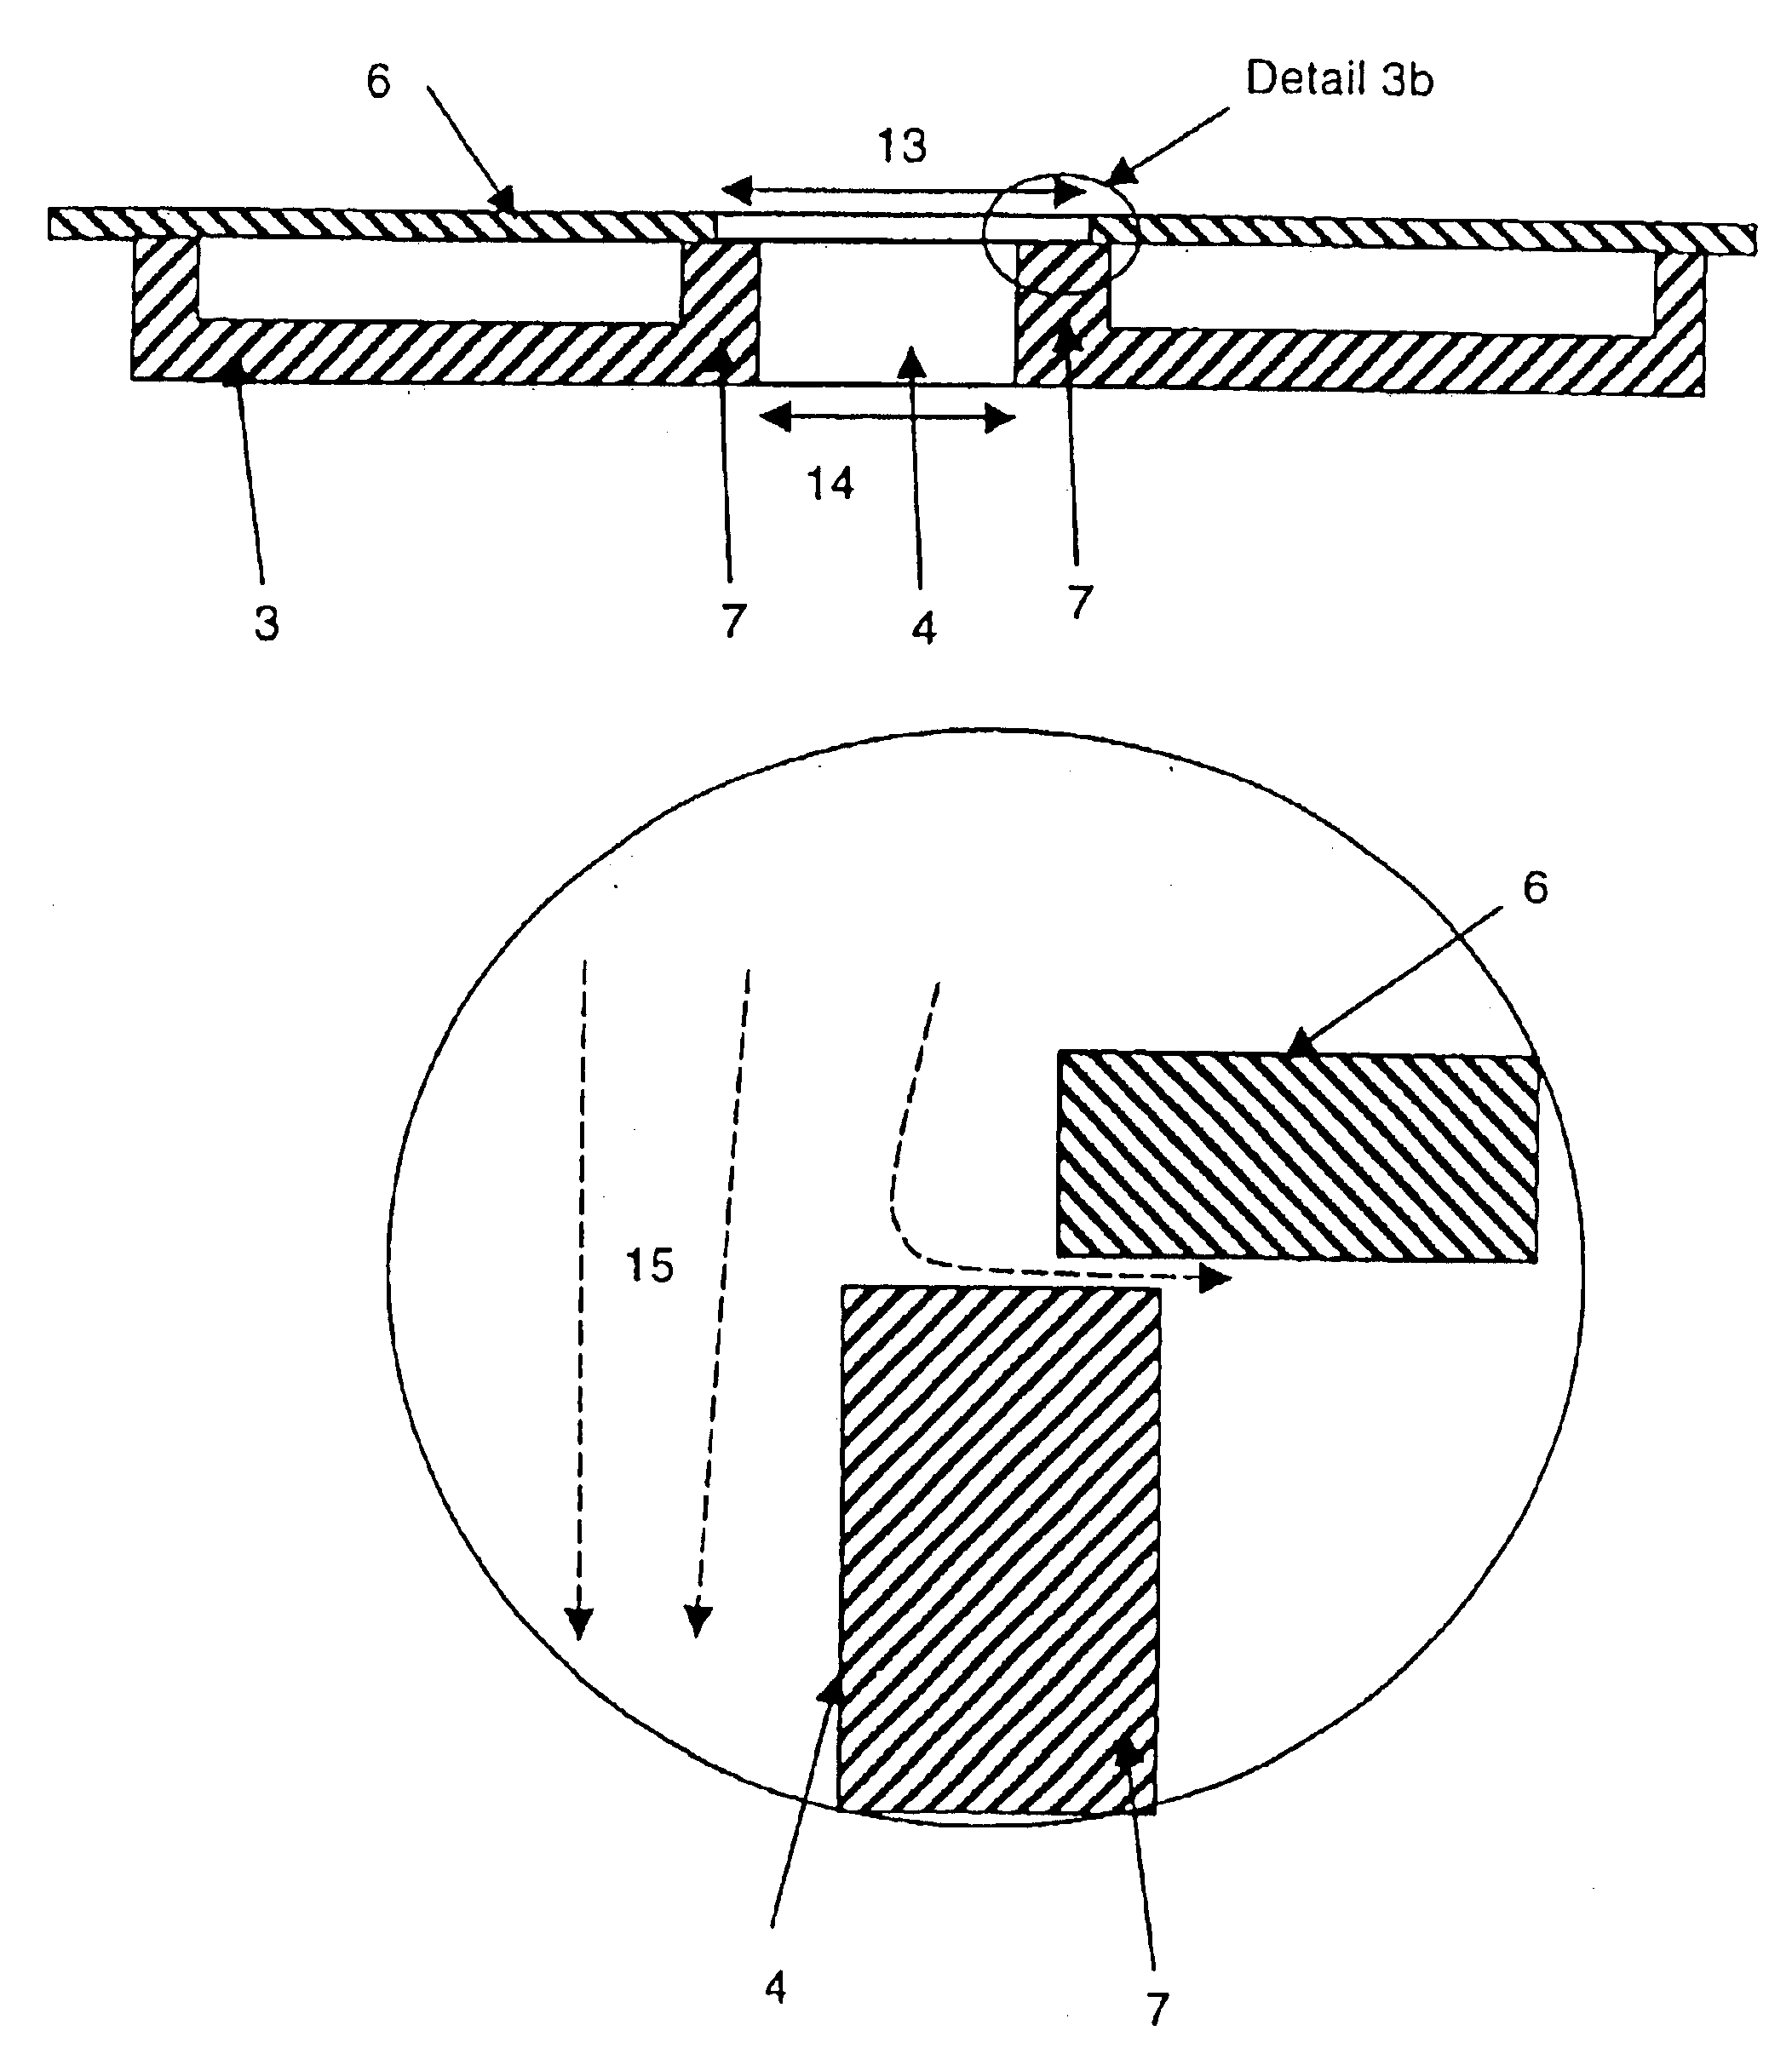 Dilution air hole in a gas turbine combustion chamber with combustion chamber tiles